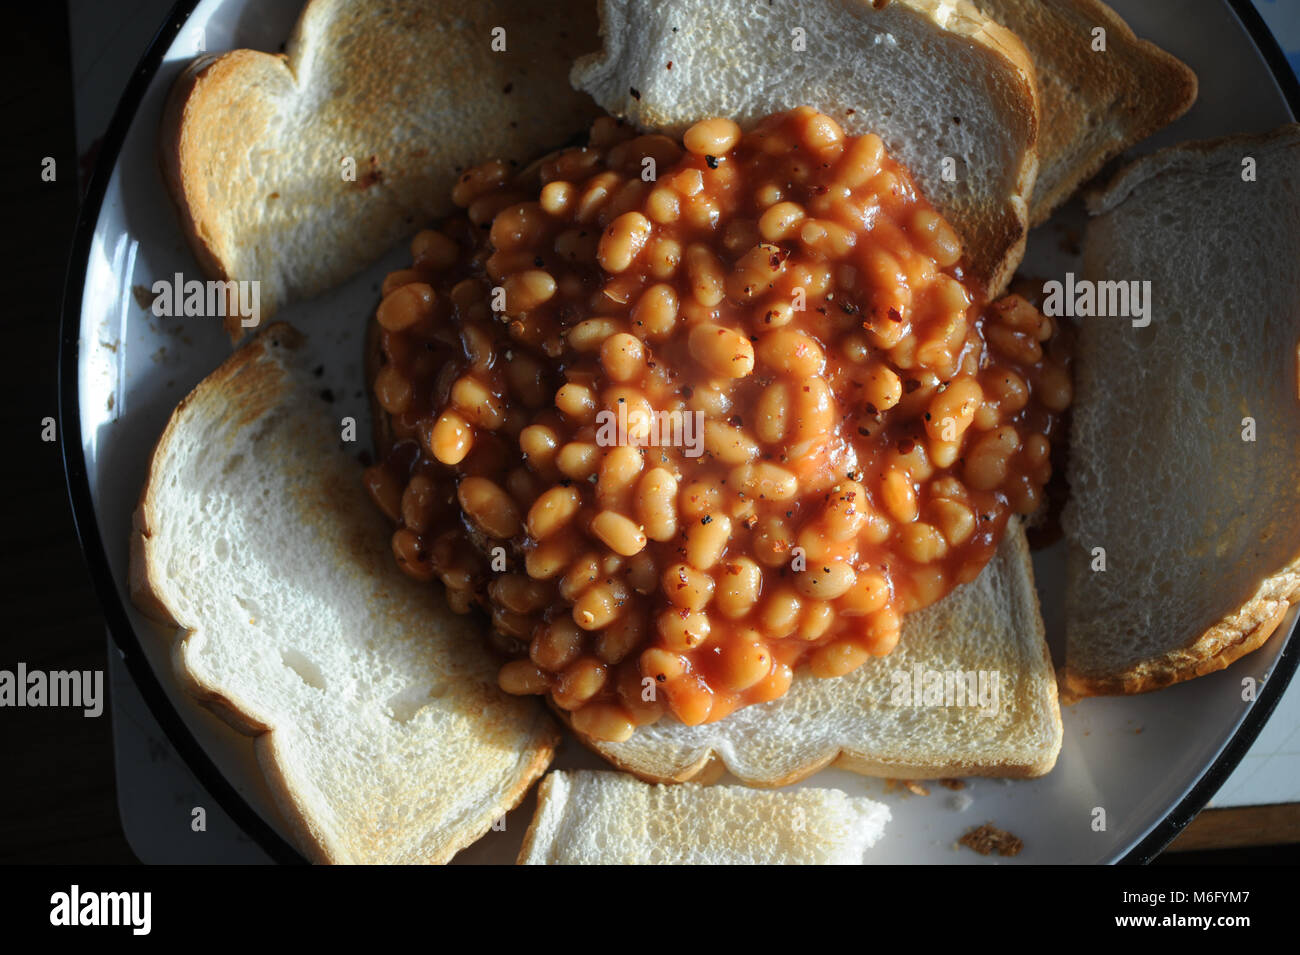 A pile of beans on toast  with chilli flakes sprinkled on top as a lunch snack. Stock Photo